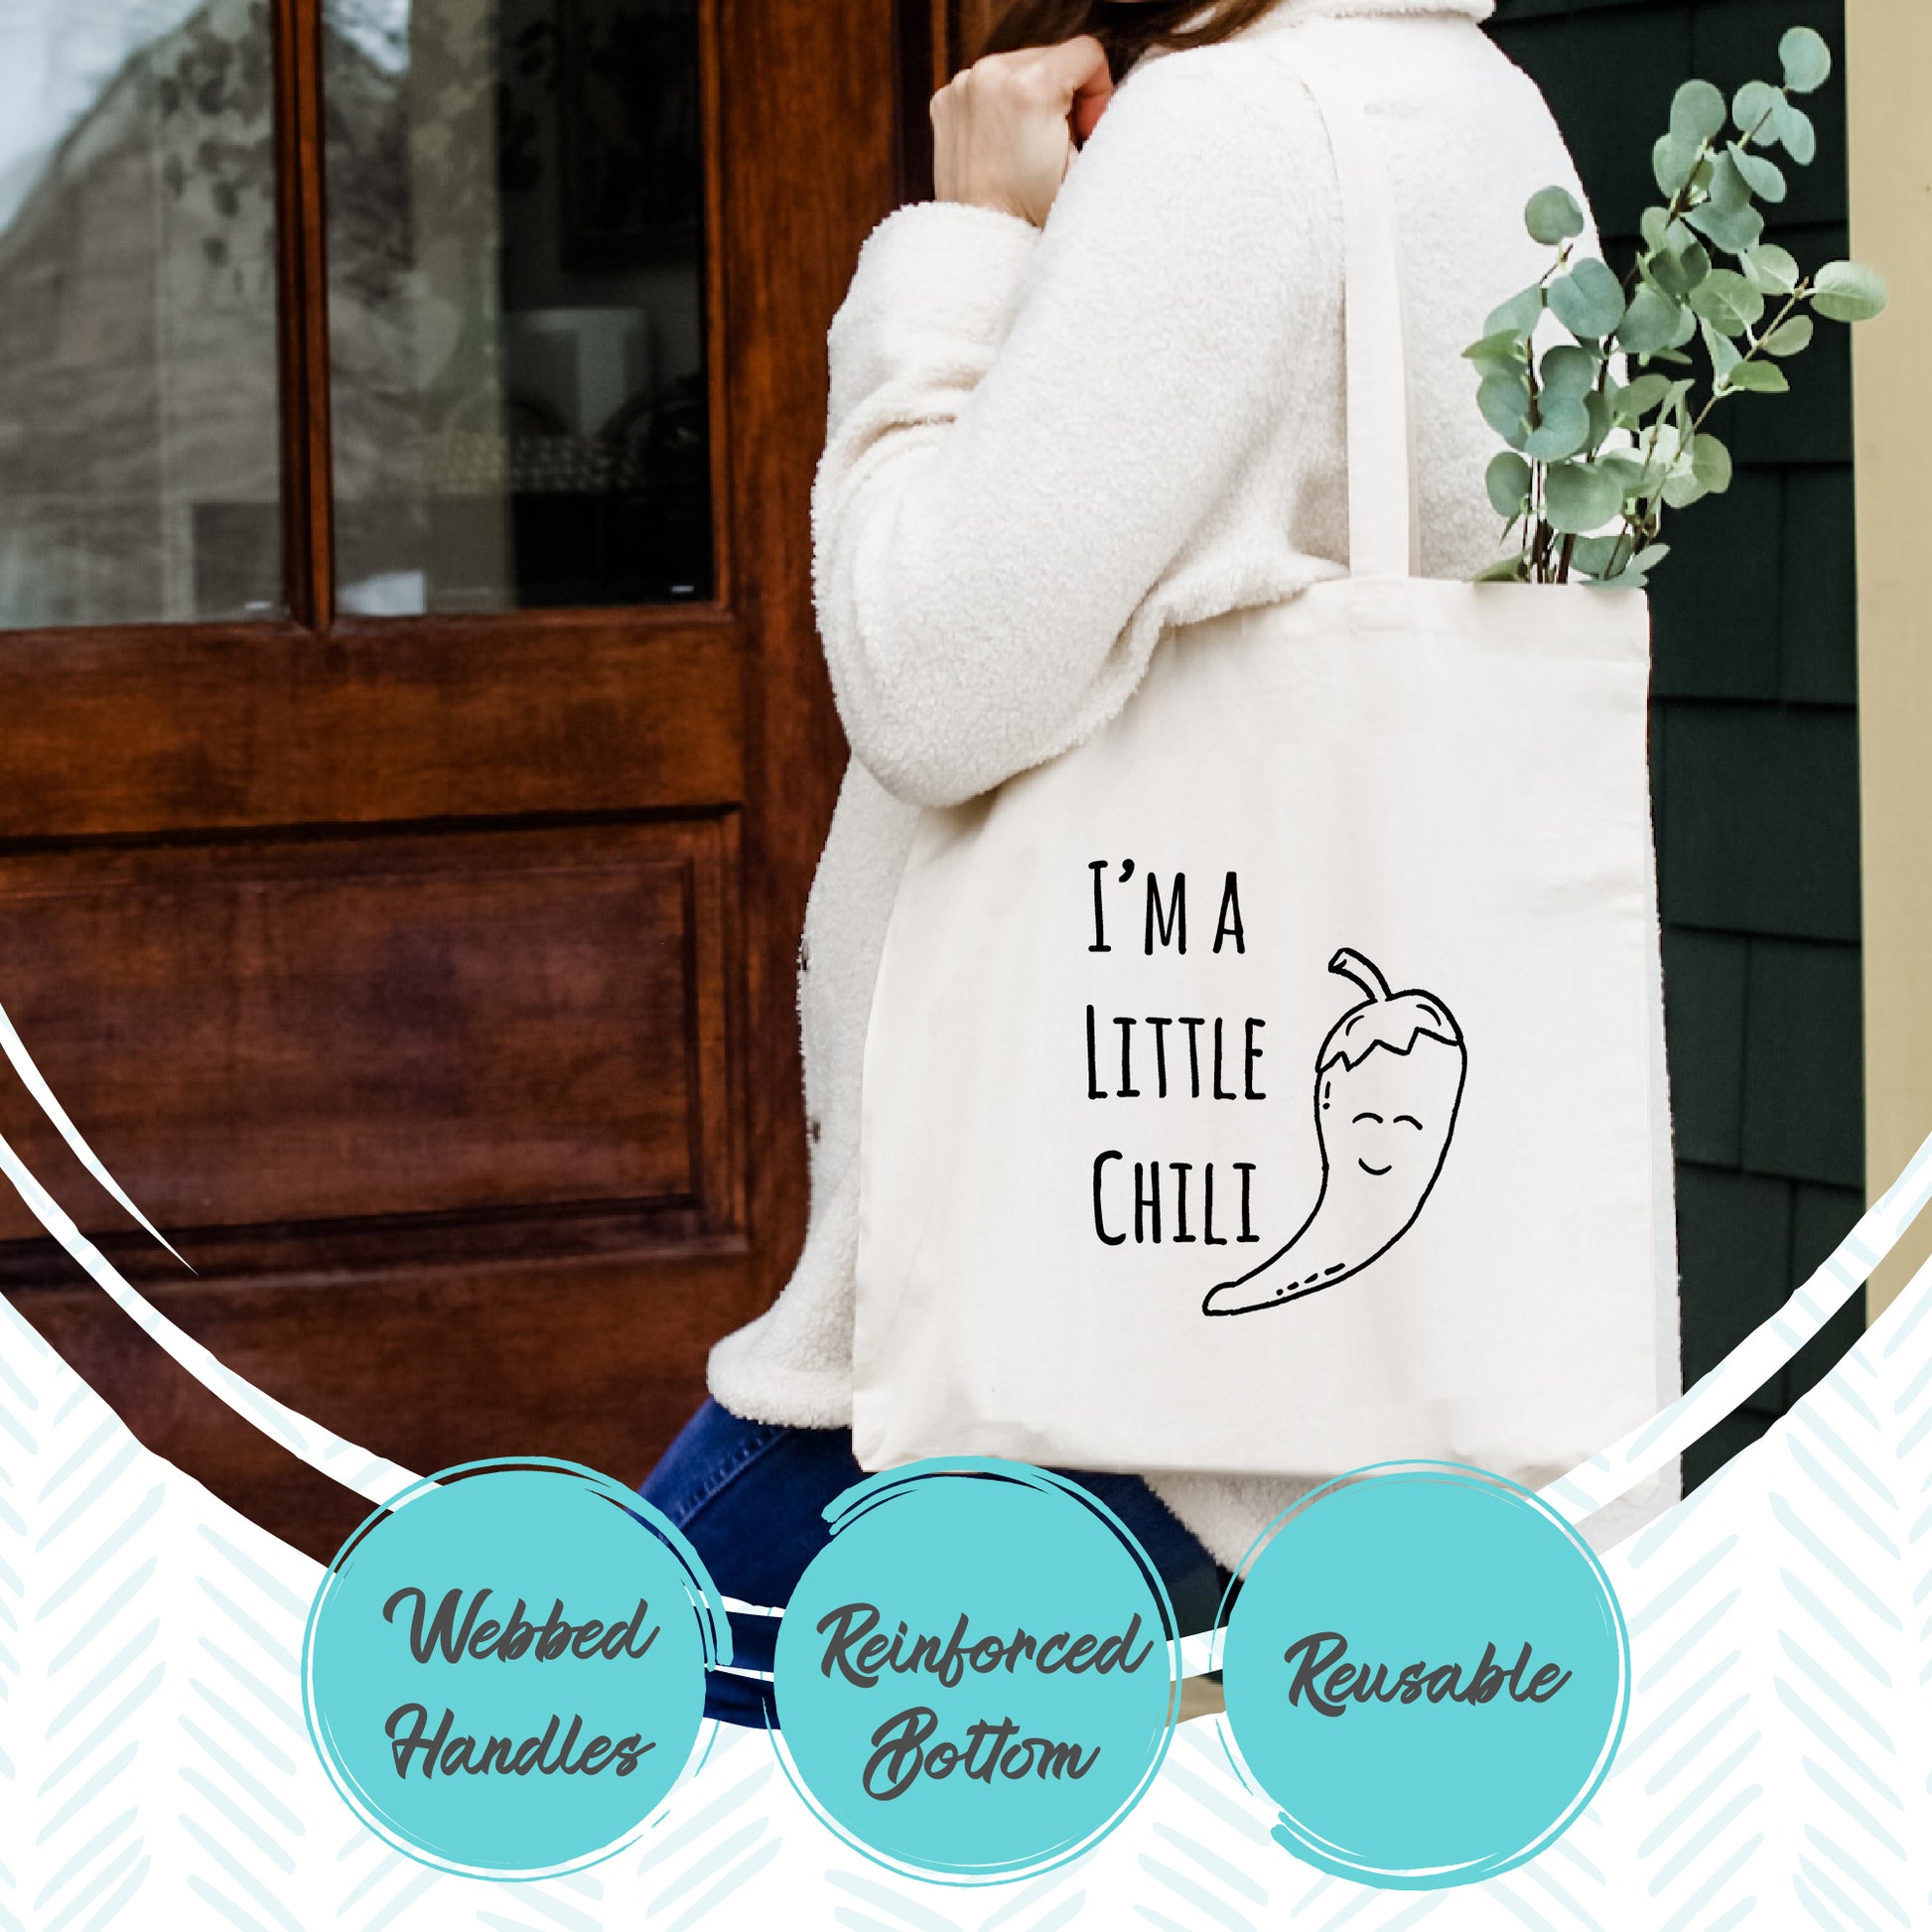 Fight For The Things You Care About (RBG) - Tote Bag - MoonlightMakers